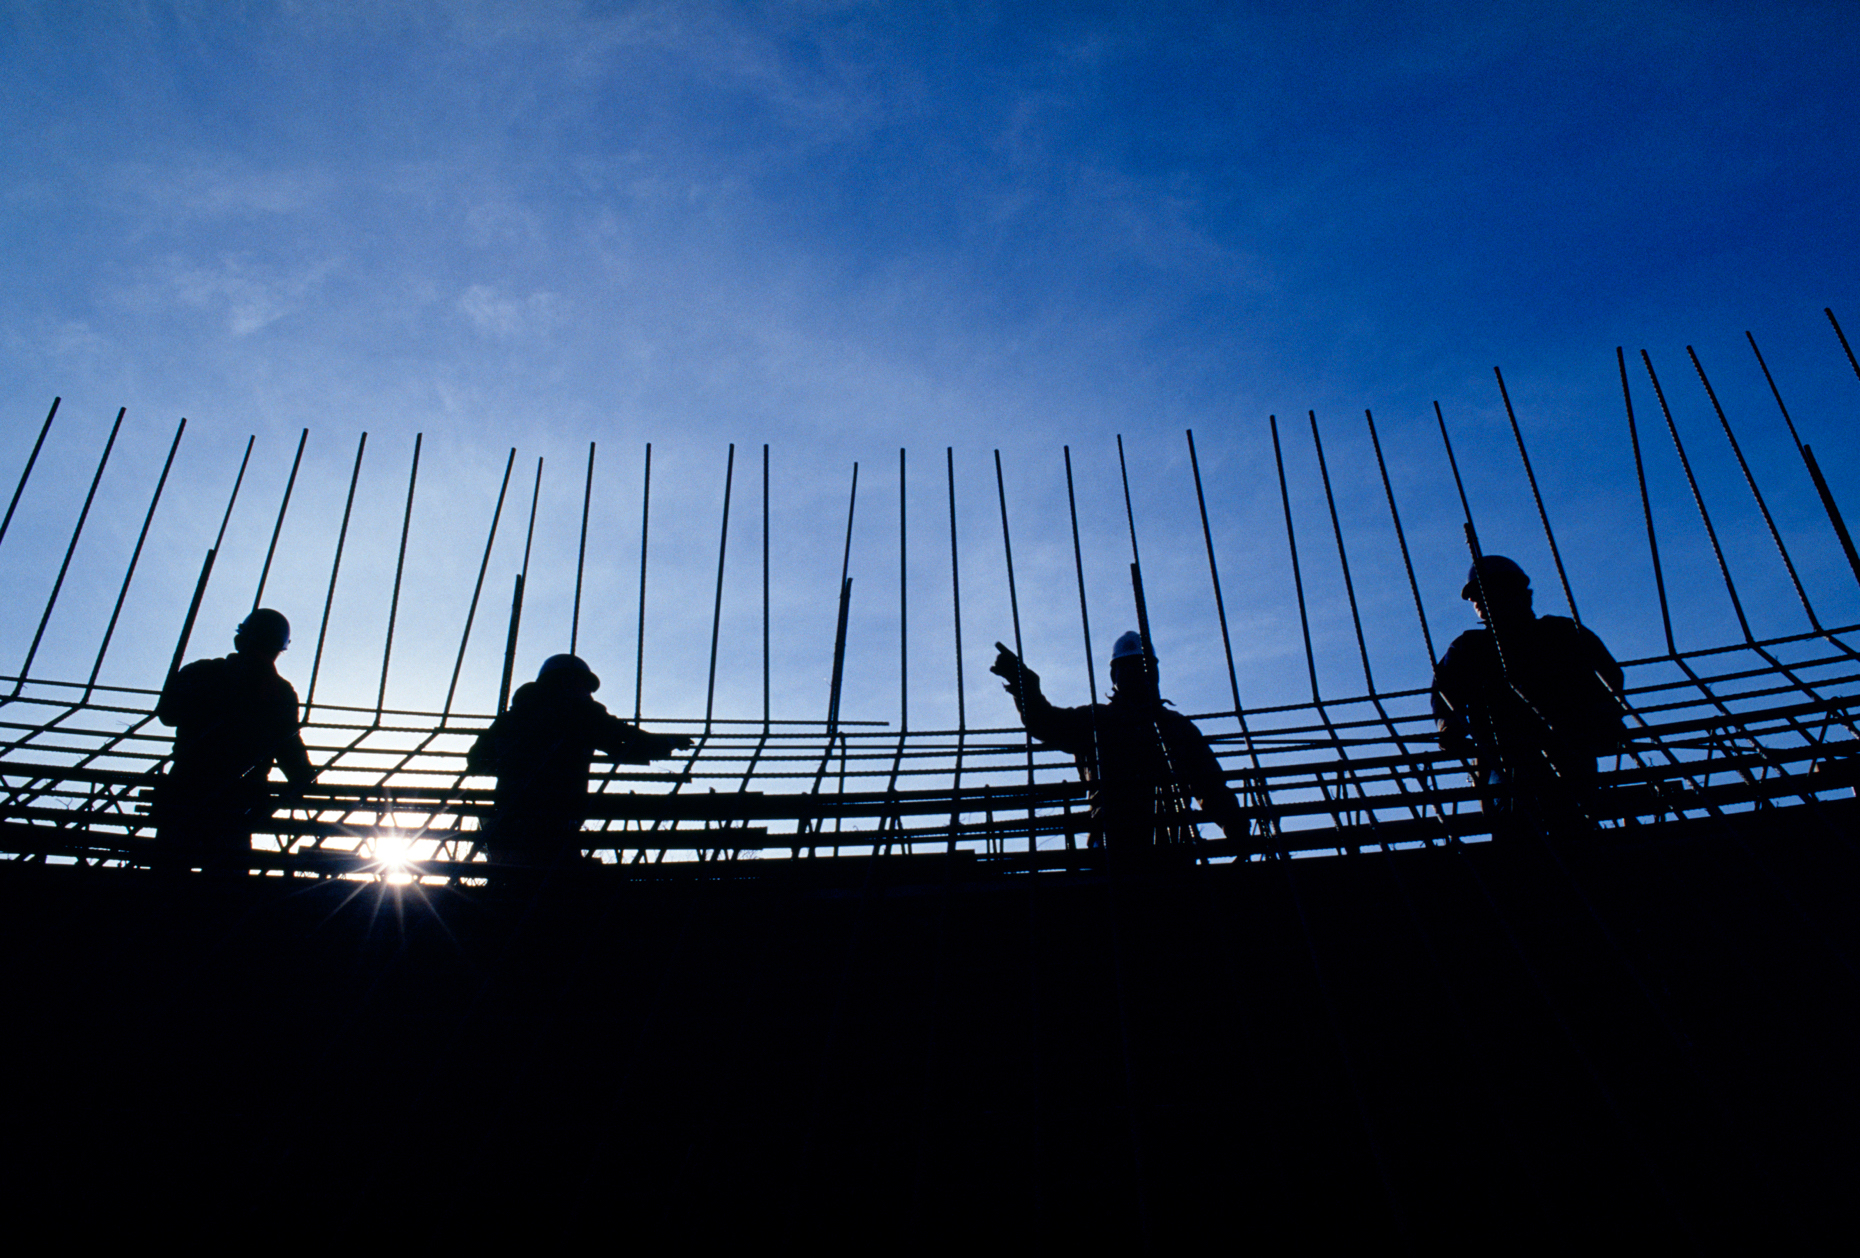 Construction workers silhoutted against a blue sky.  Re-enforcin